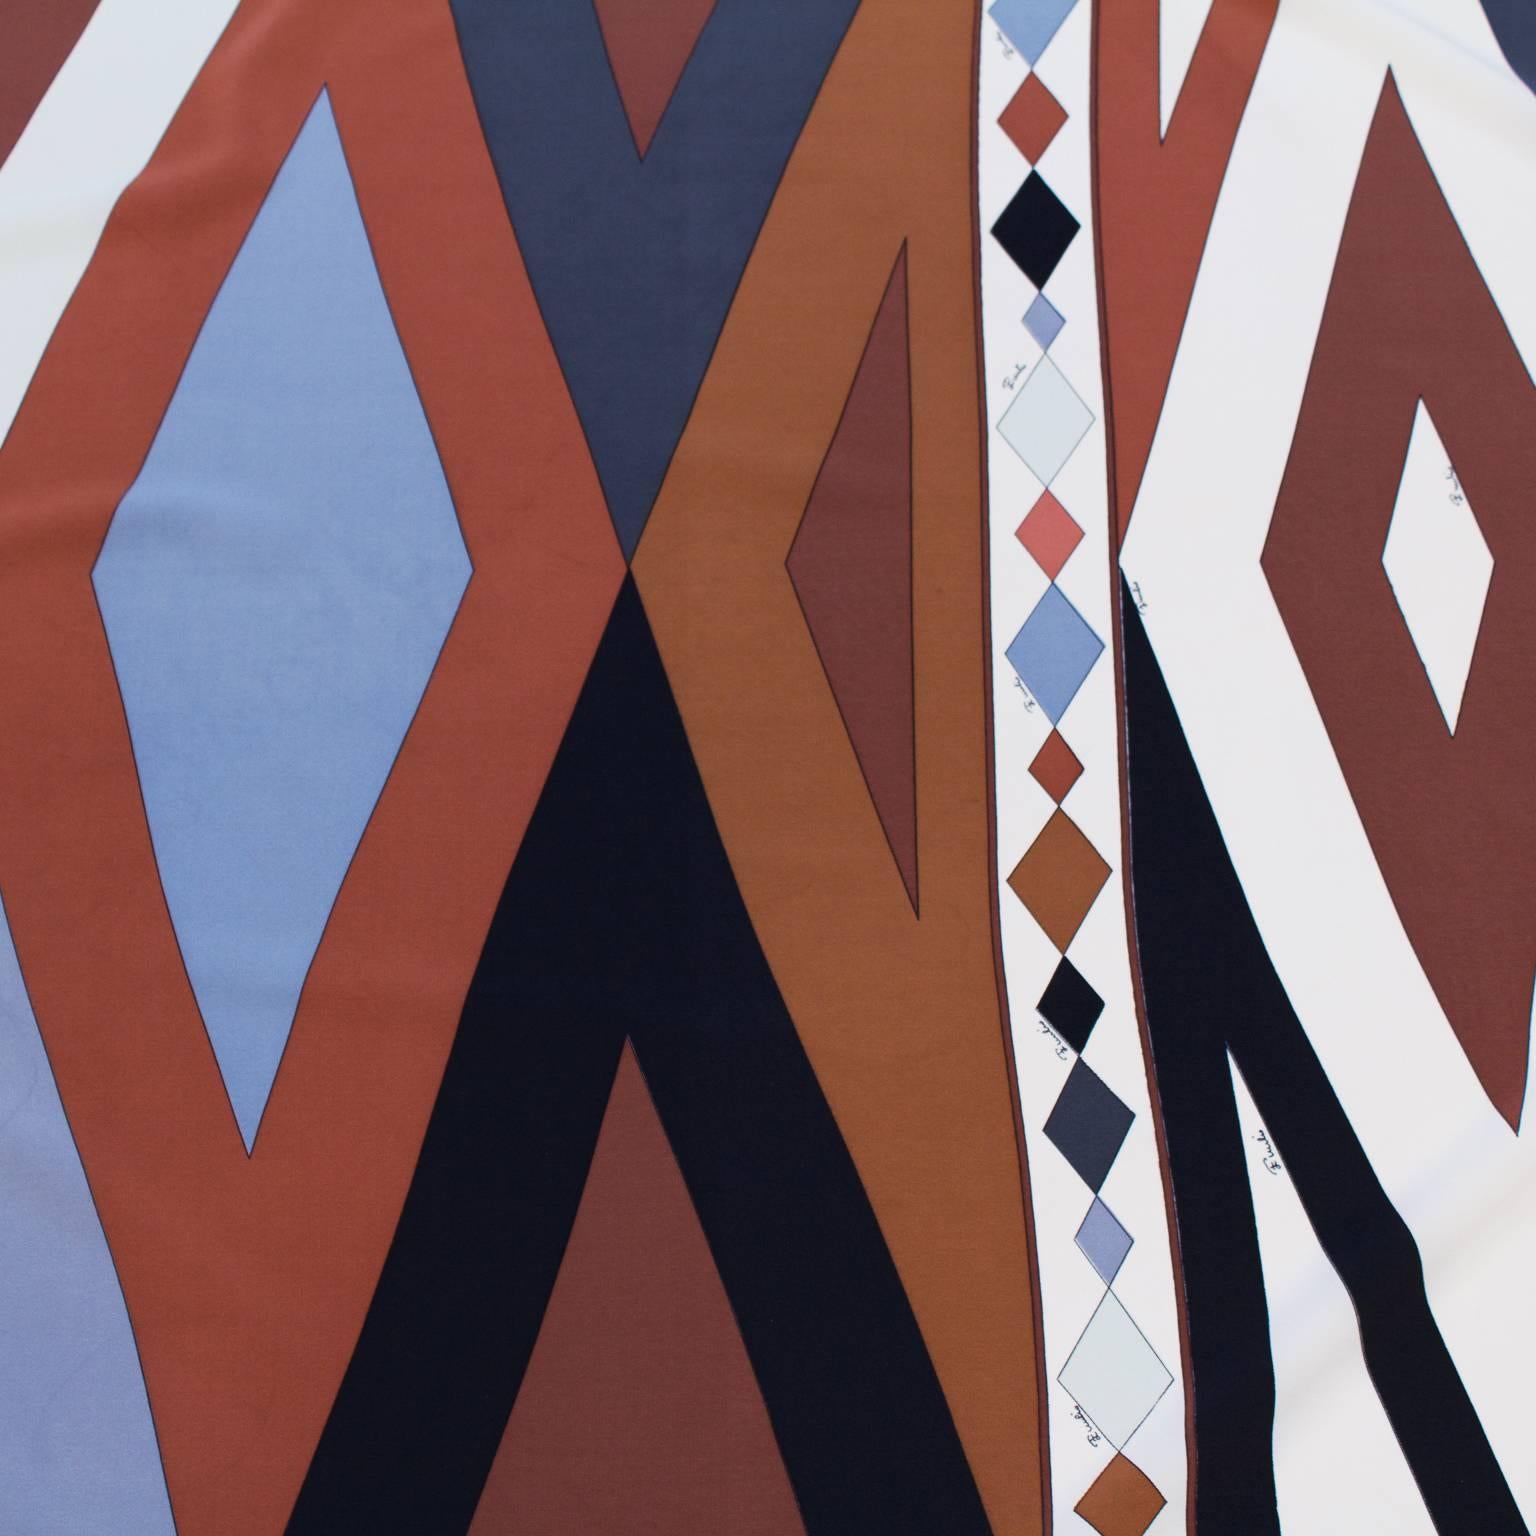 Emilio Pucci silk scarf from the 1970's featuring a geometric print in browns, grays, black and white. Signed Emilio Pucci throughout, very minor stains. In excellent condition. Measures 34